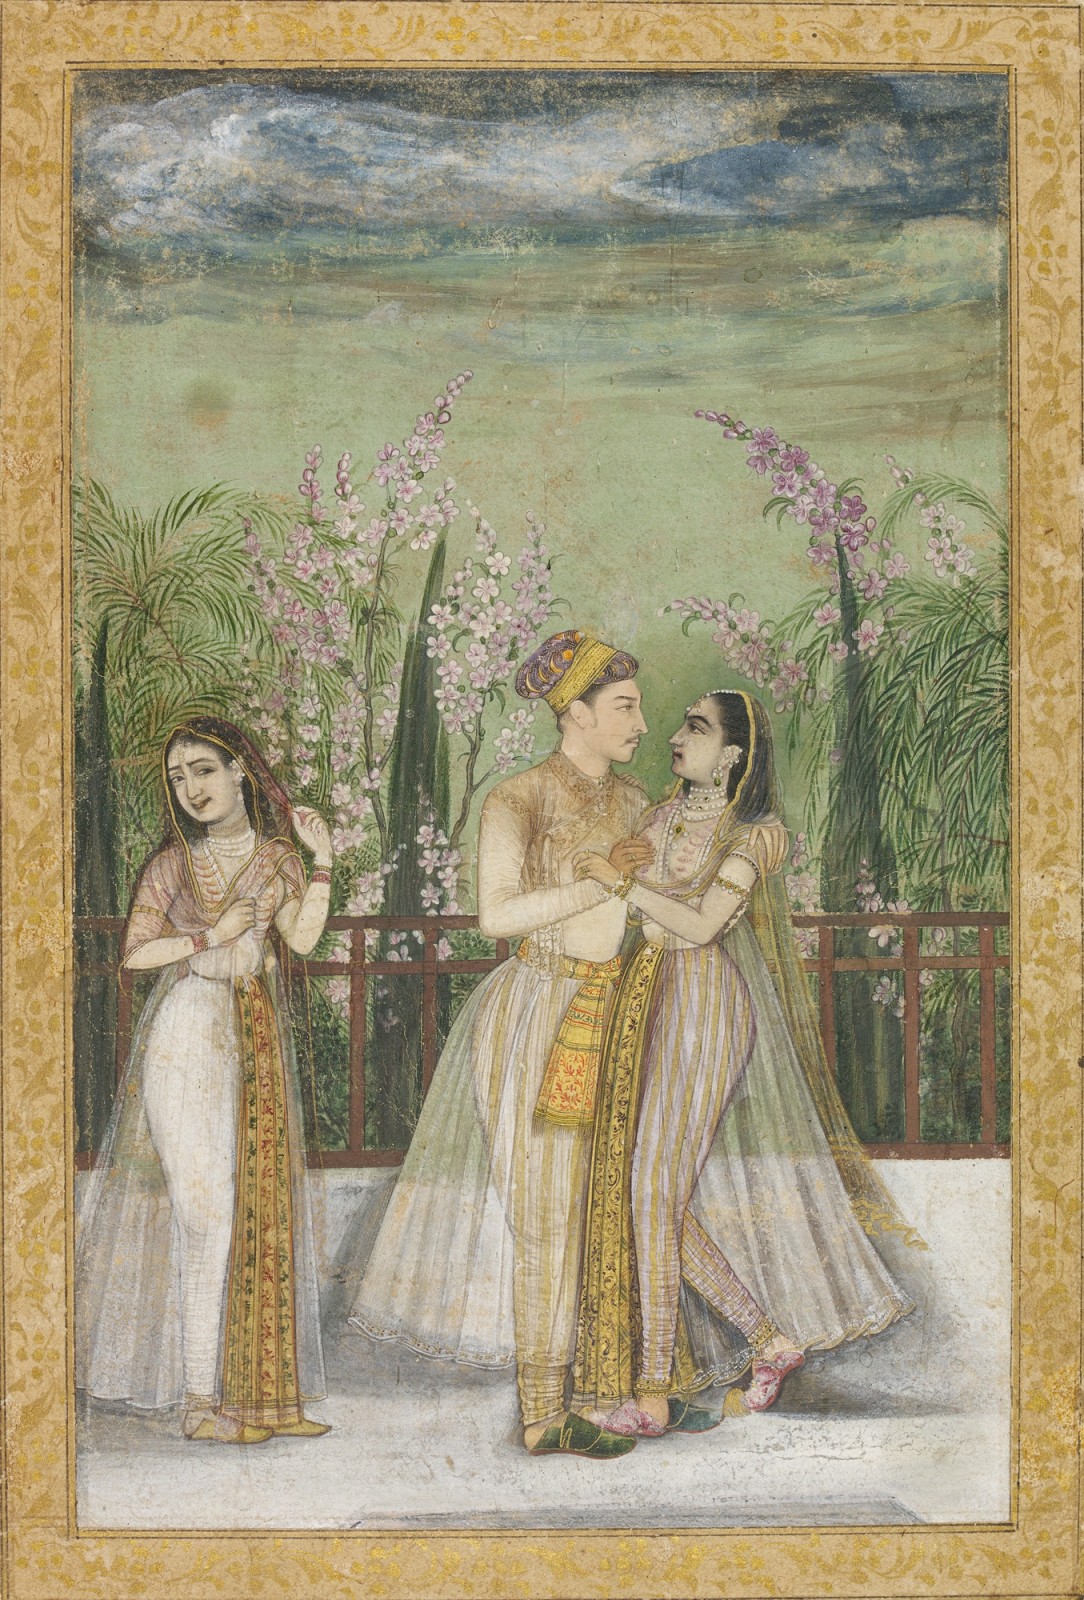 A Prince and his Mistress in an Embrace, Mughal India, c. 1640